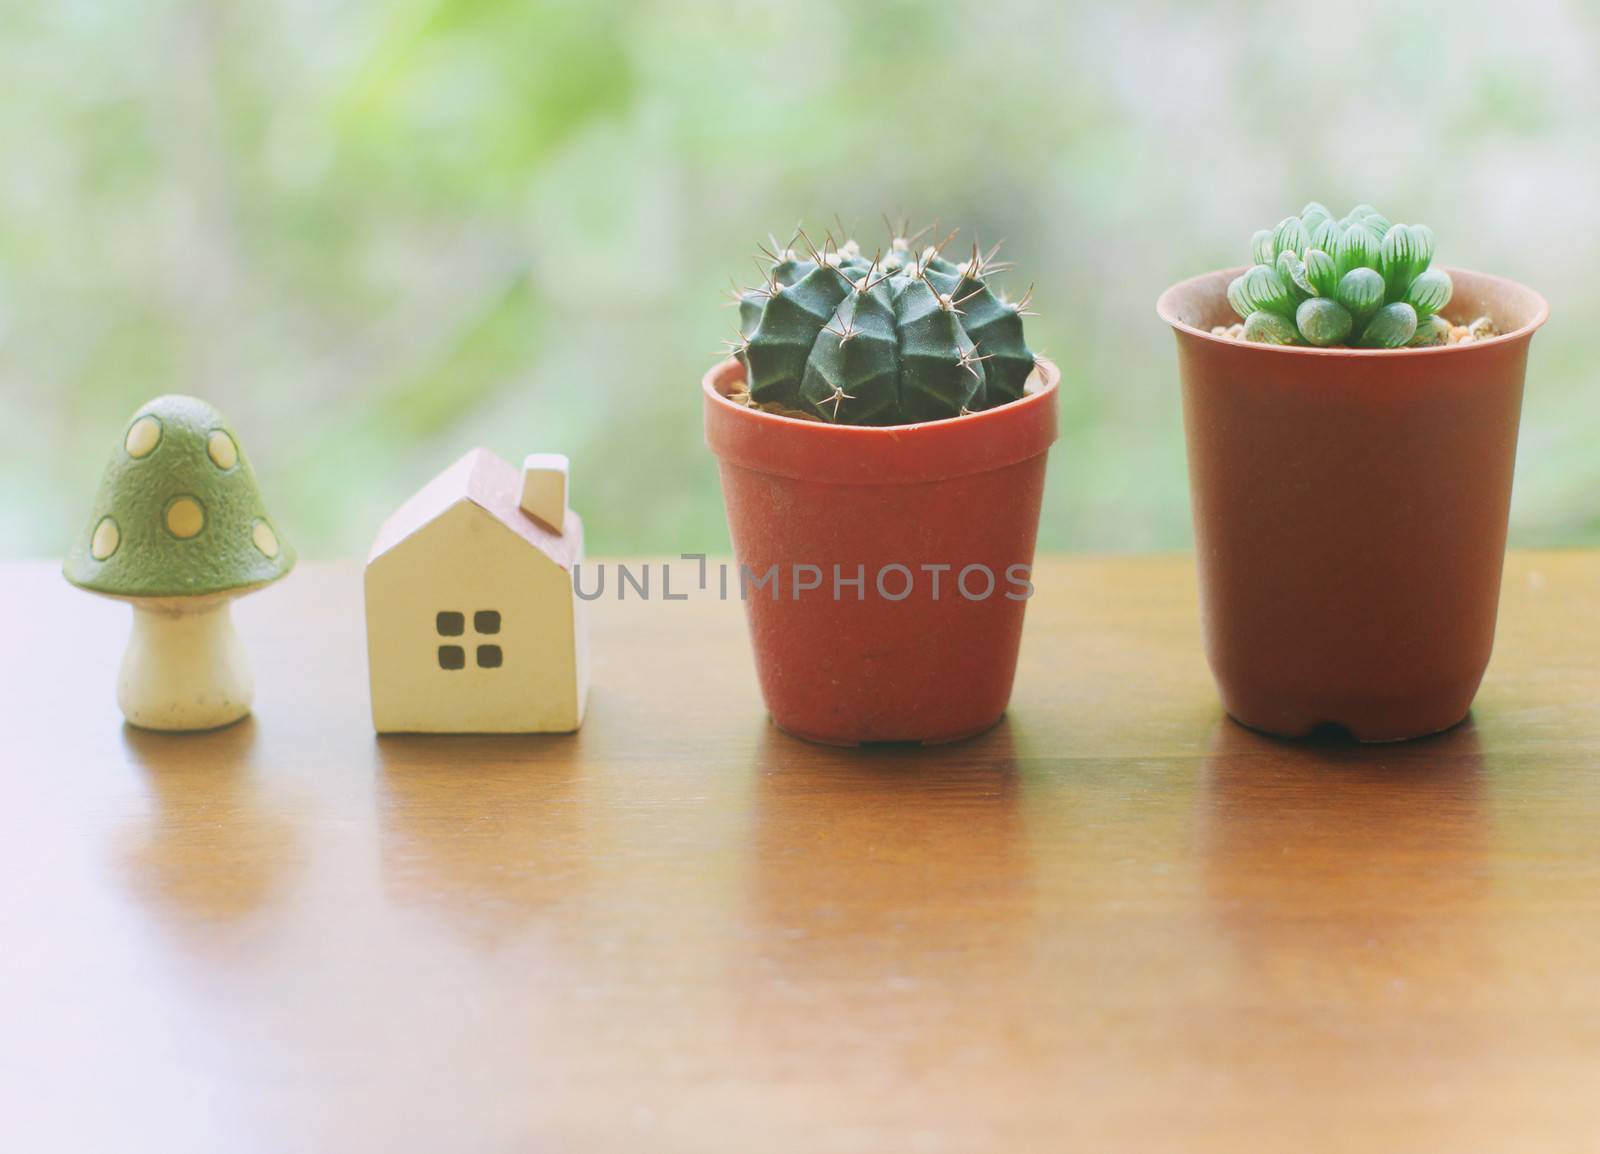 Cactus with small house and mushroom for decorated, retro filter by nuchylee